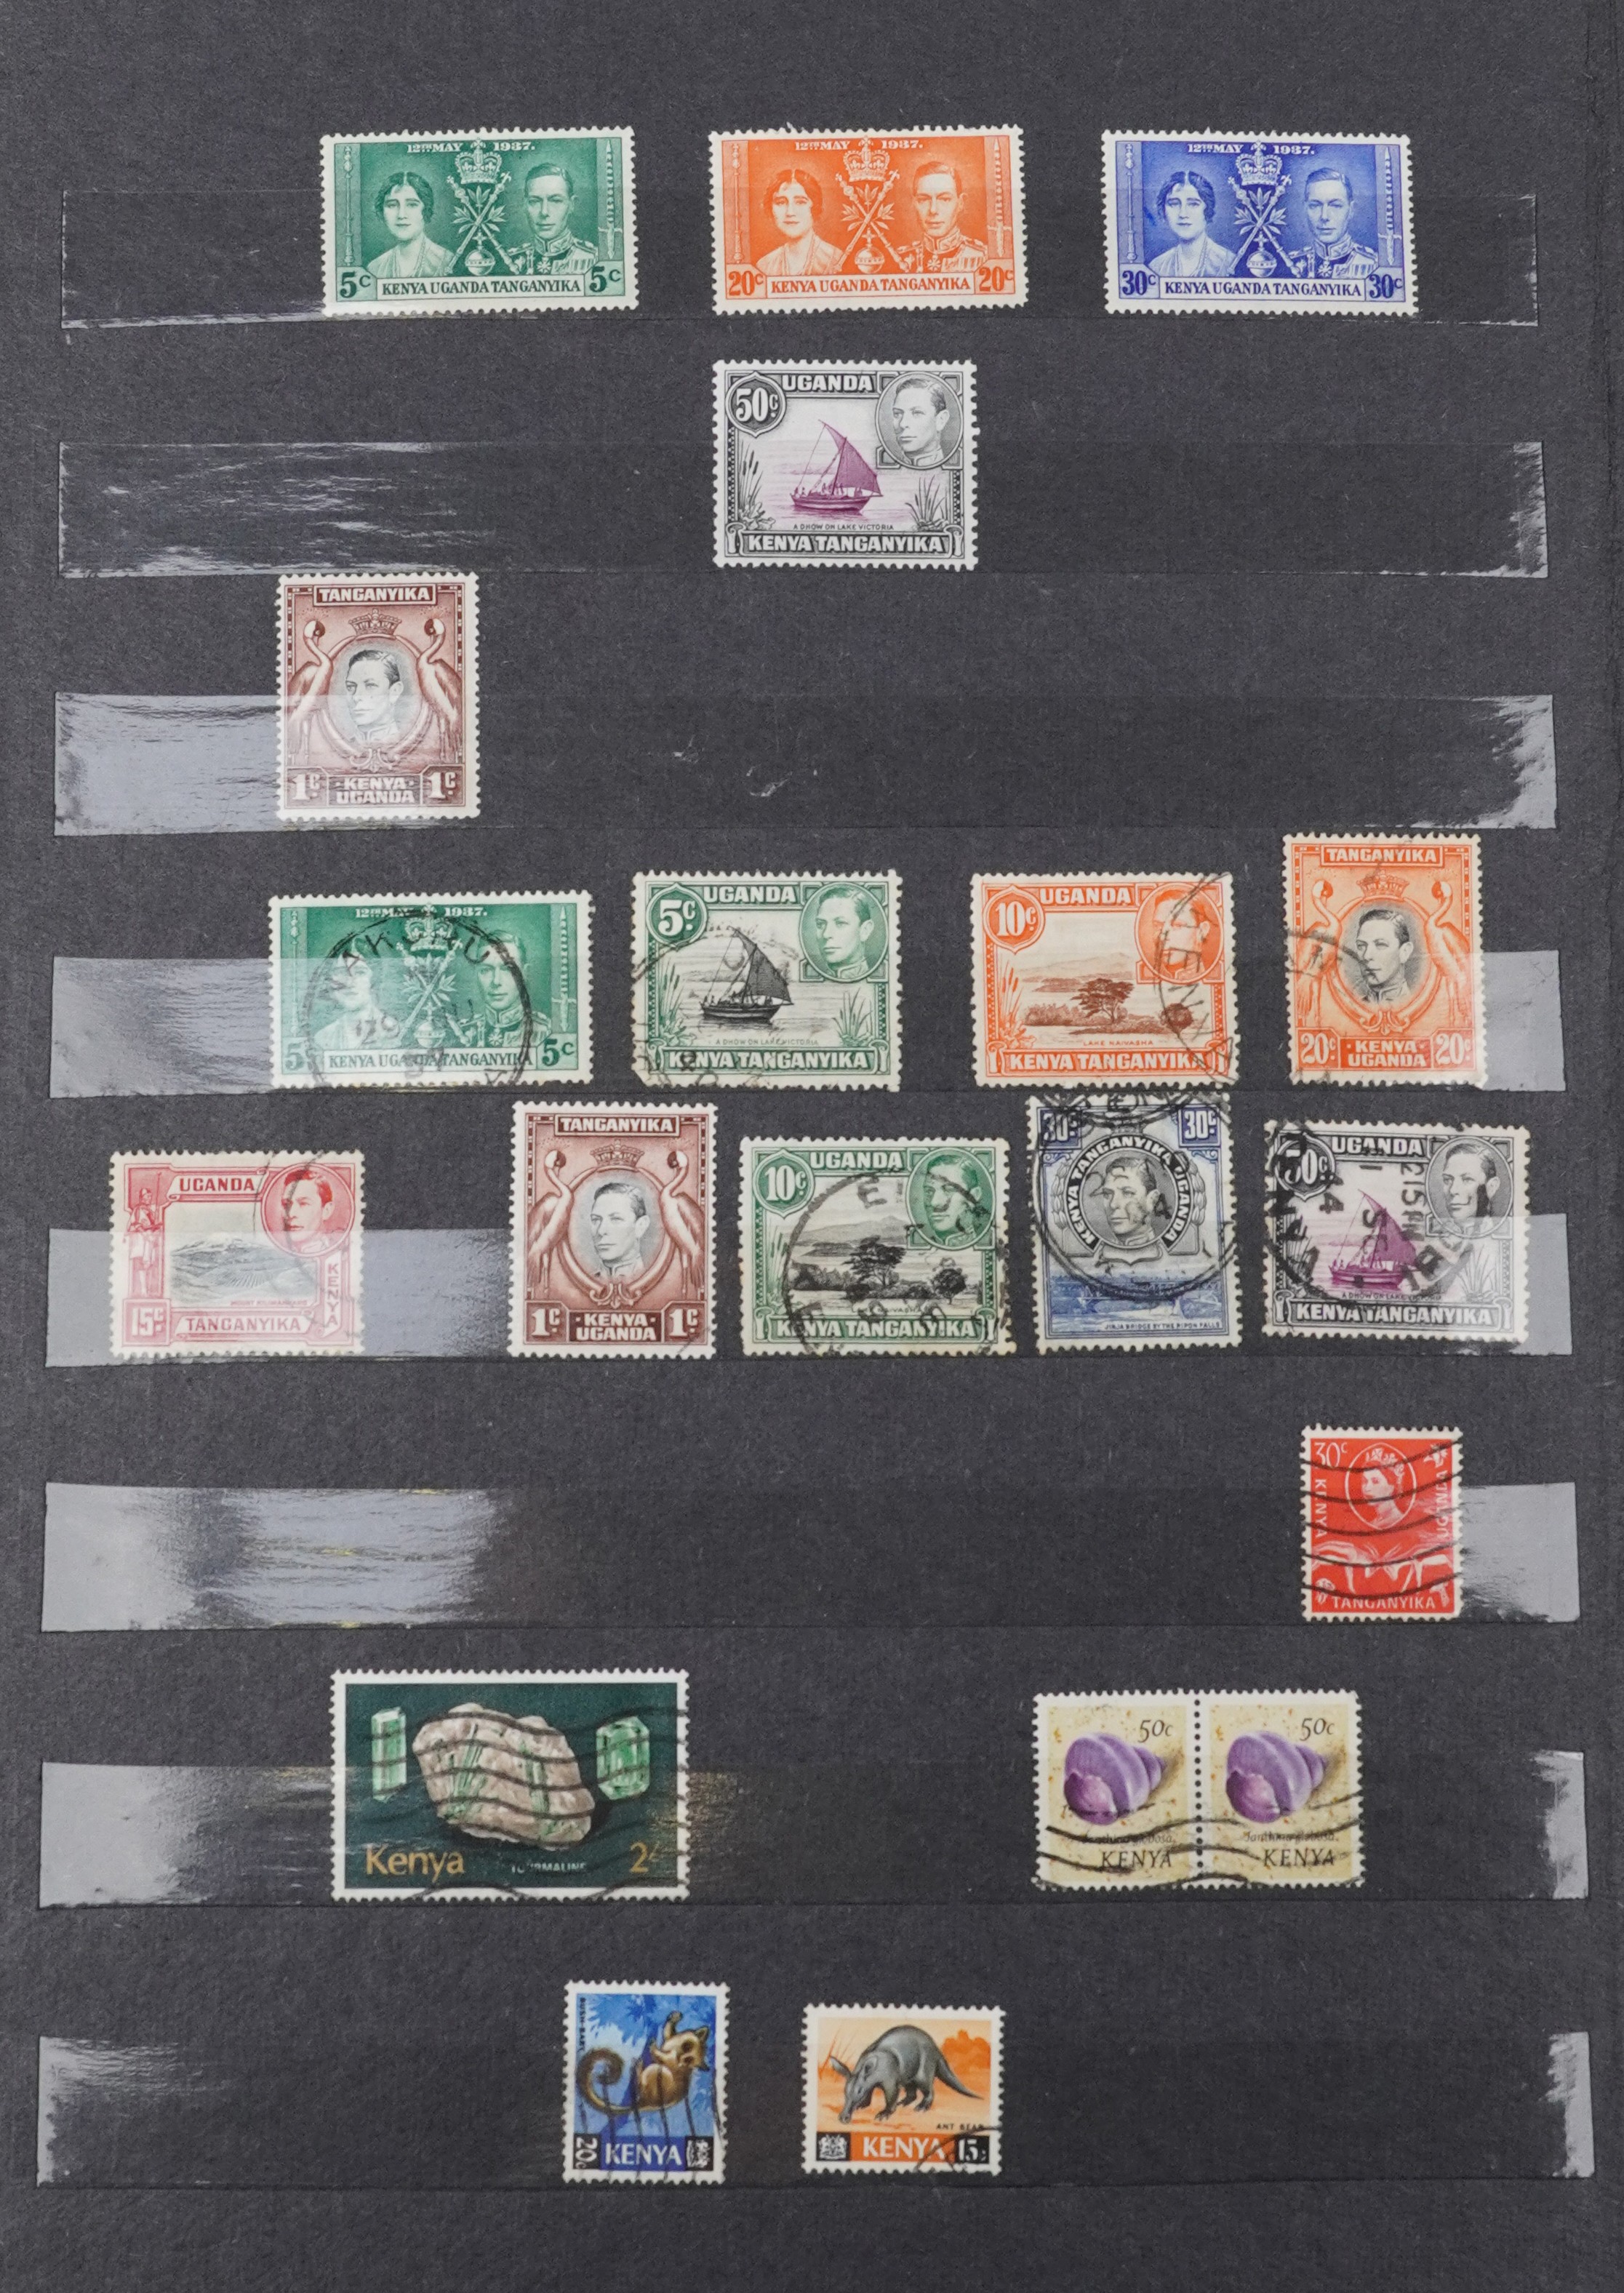 Collection of world stamps arranged in four albums or stock books - Image 3 of 7